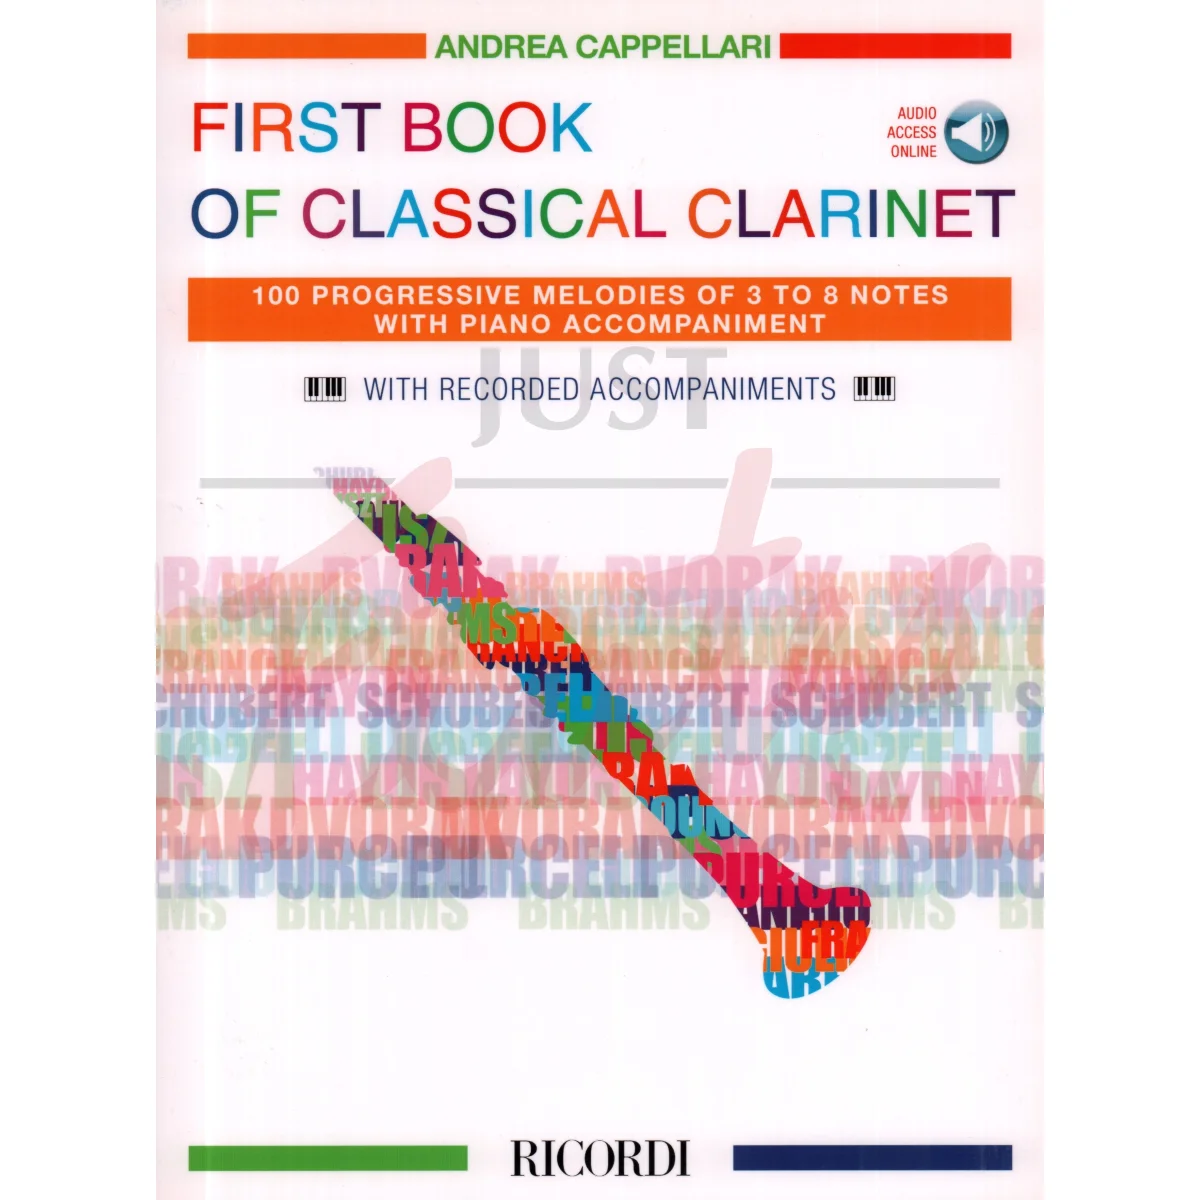 First Book of Classical Clarinet with Piano Accompaniment